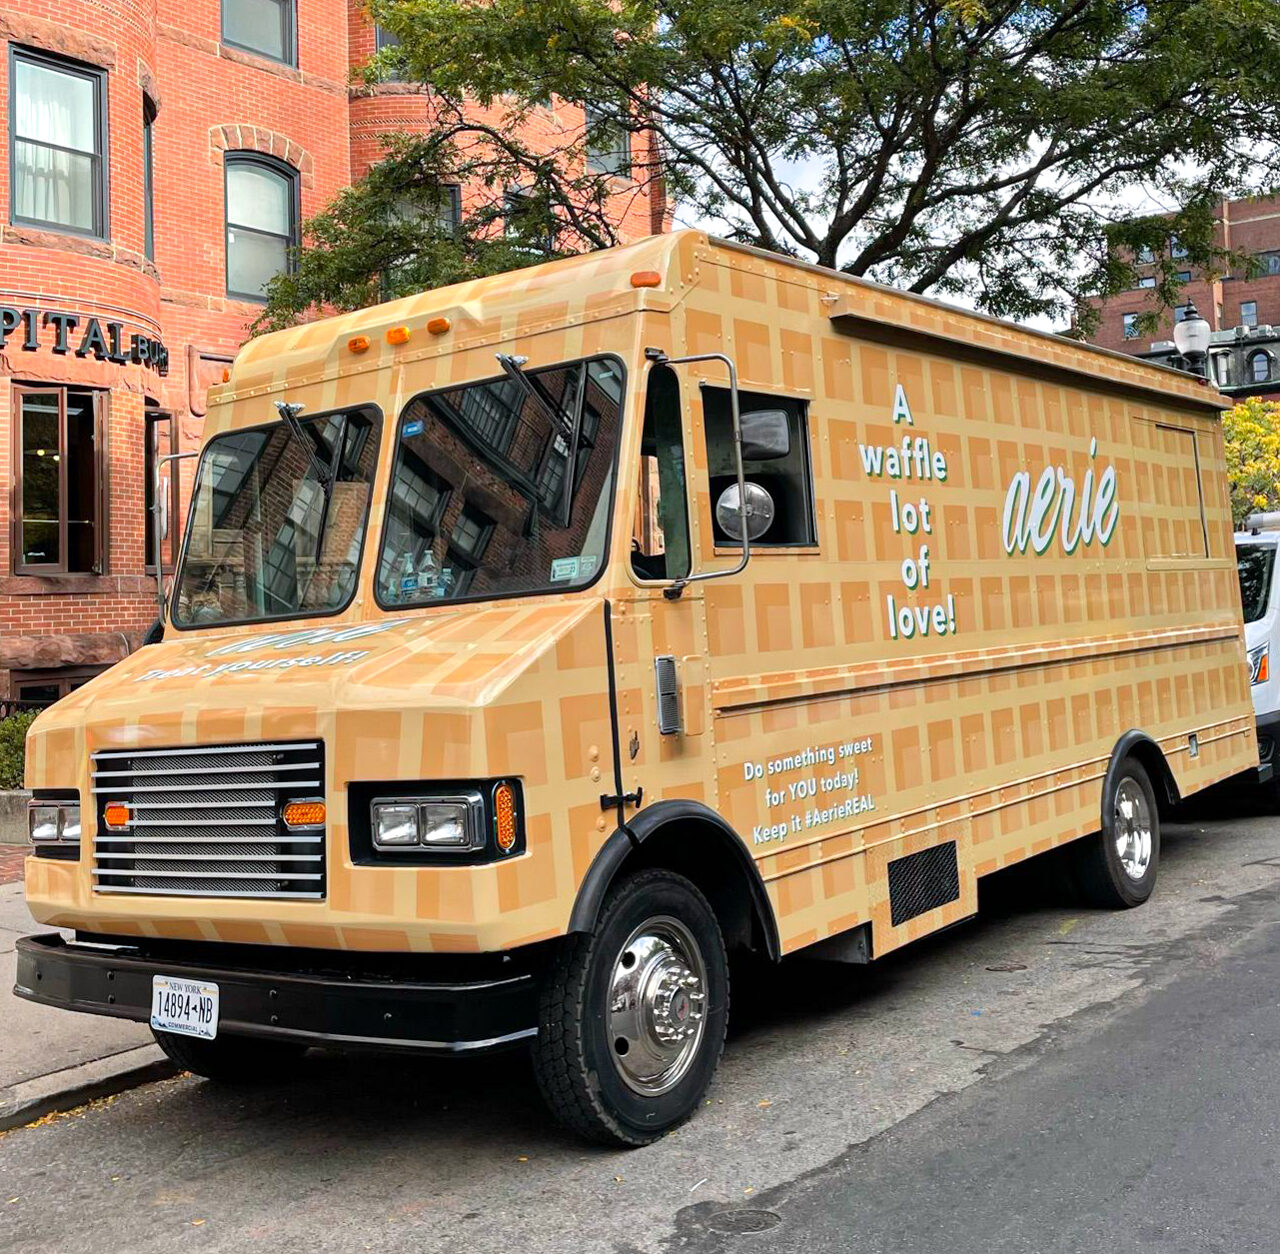 Aerie Waffle Truck On US Mobile Tour